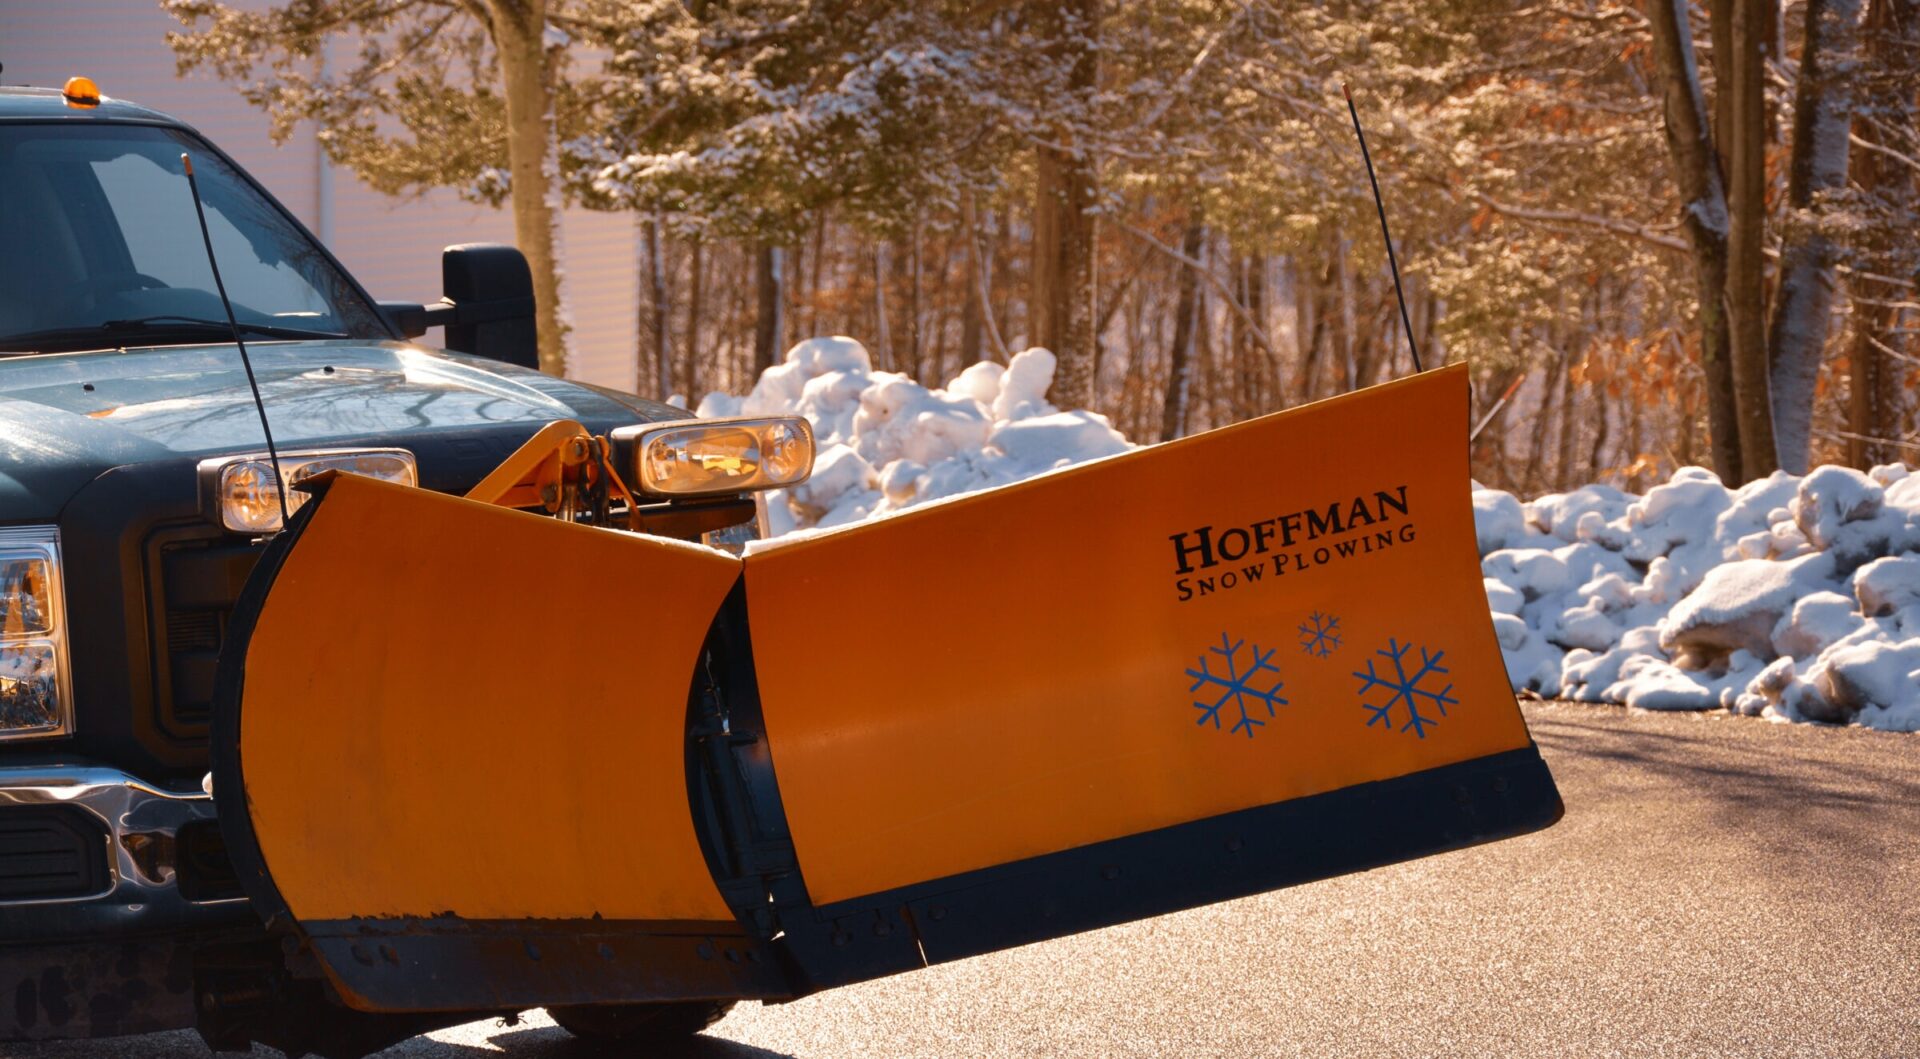 A snow plow truck with an orange and black blade reading "Hoffman Snow Plowing" is on a road surrounded by snowy trees with a clear sky.